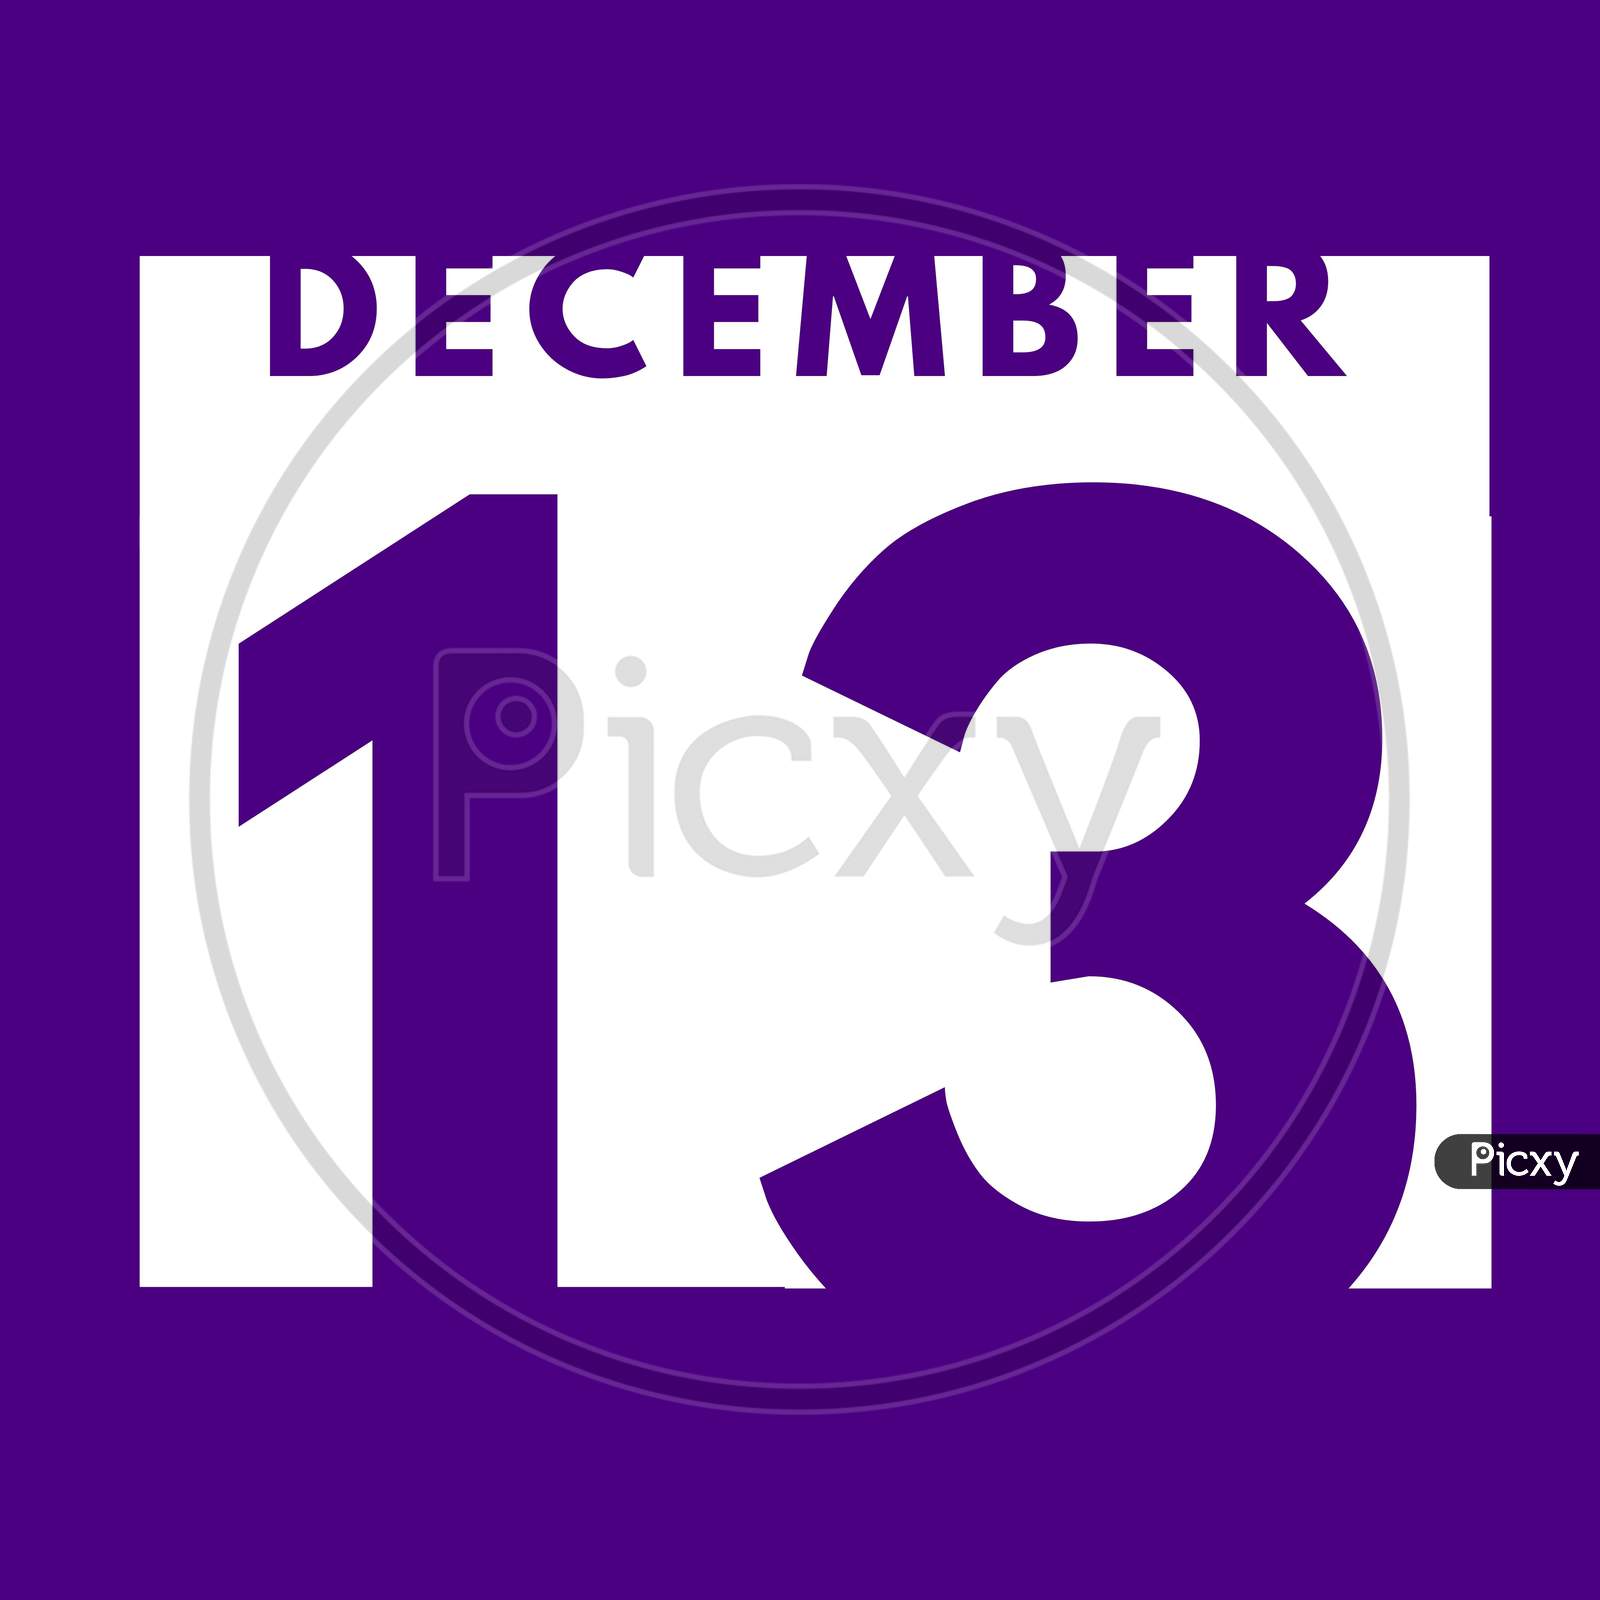 December 13 . Flat Modern Daily Calendar Icon .Date ,Day, Month .Calendar For The Month Of December